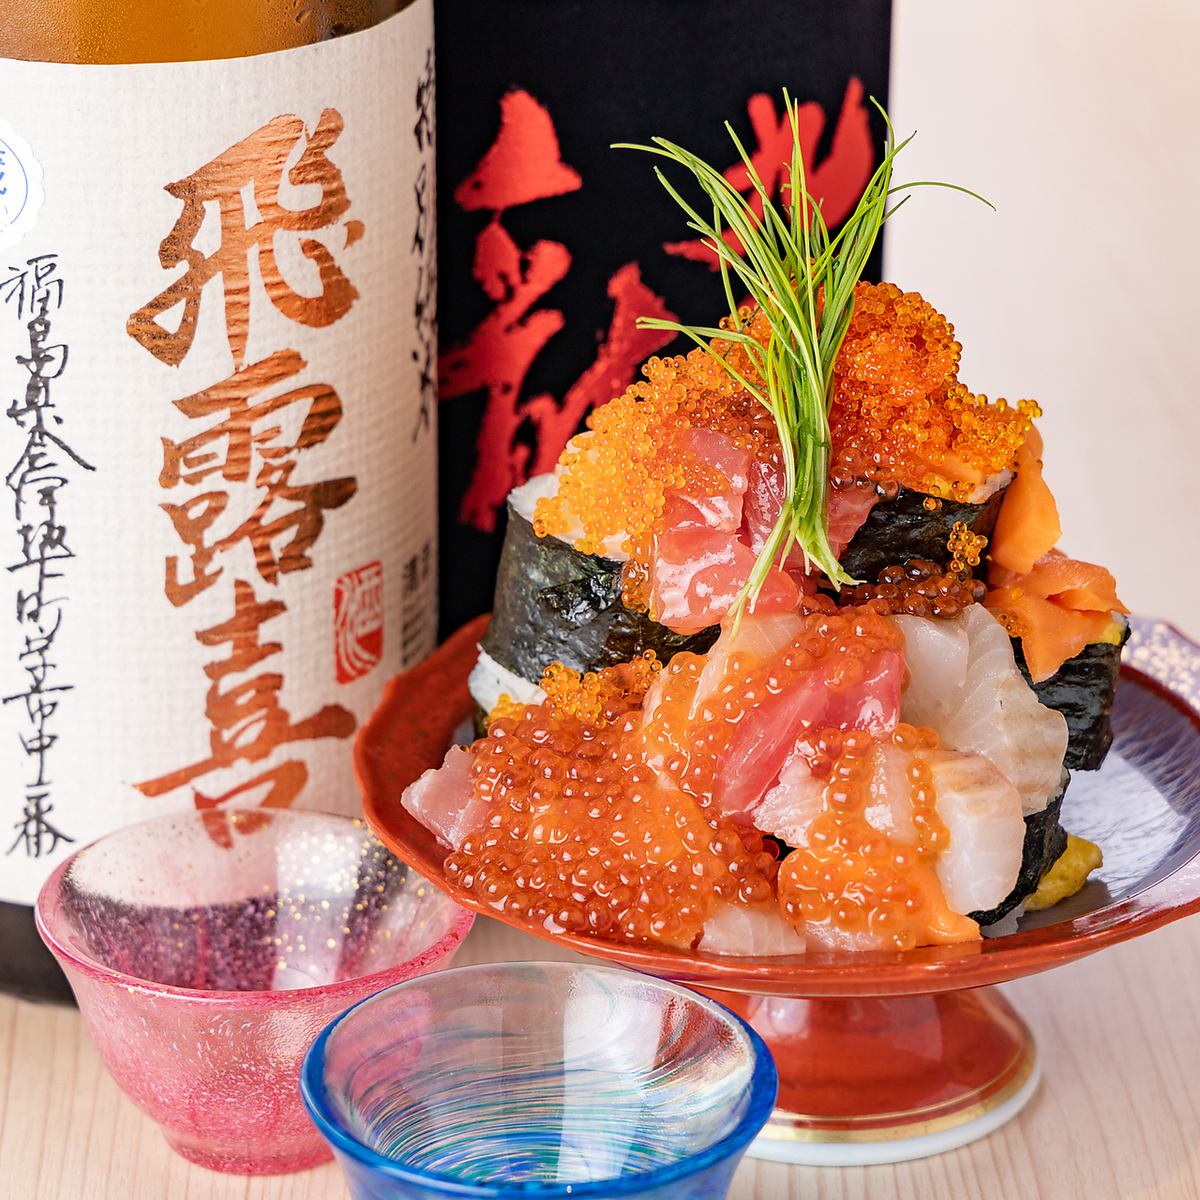 Public sushi bar Opens at 4:00 pm! All-you-can-drink a la carte for 1,000 yen♪ Orders up to 2 pieces of sushi OK